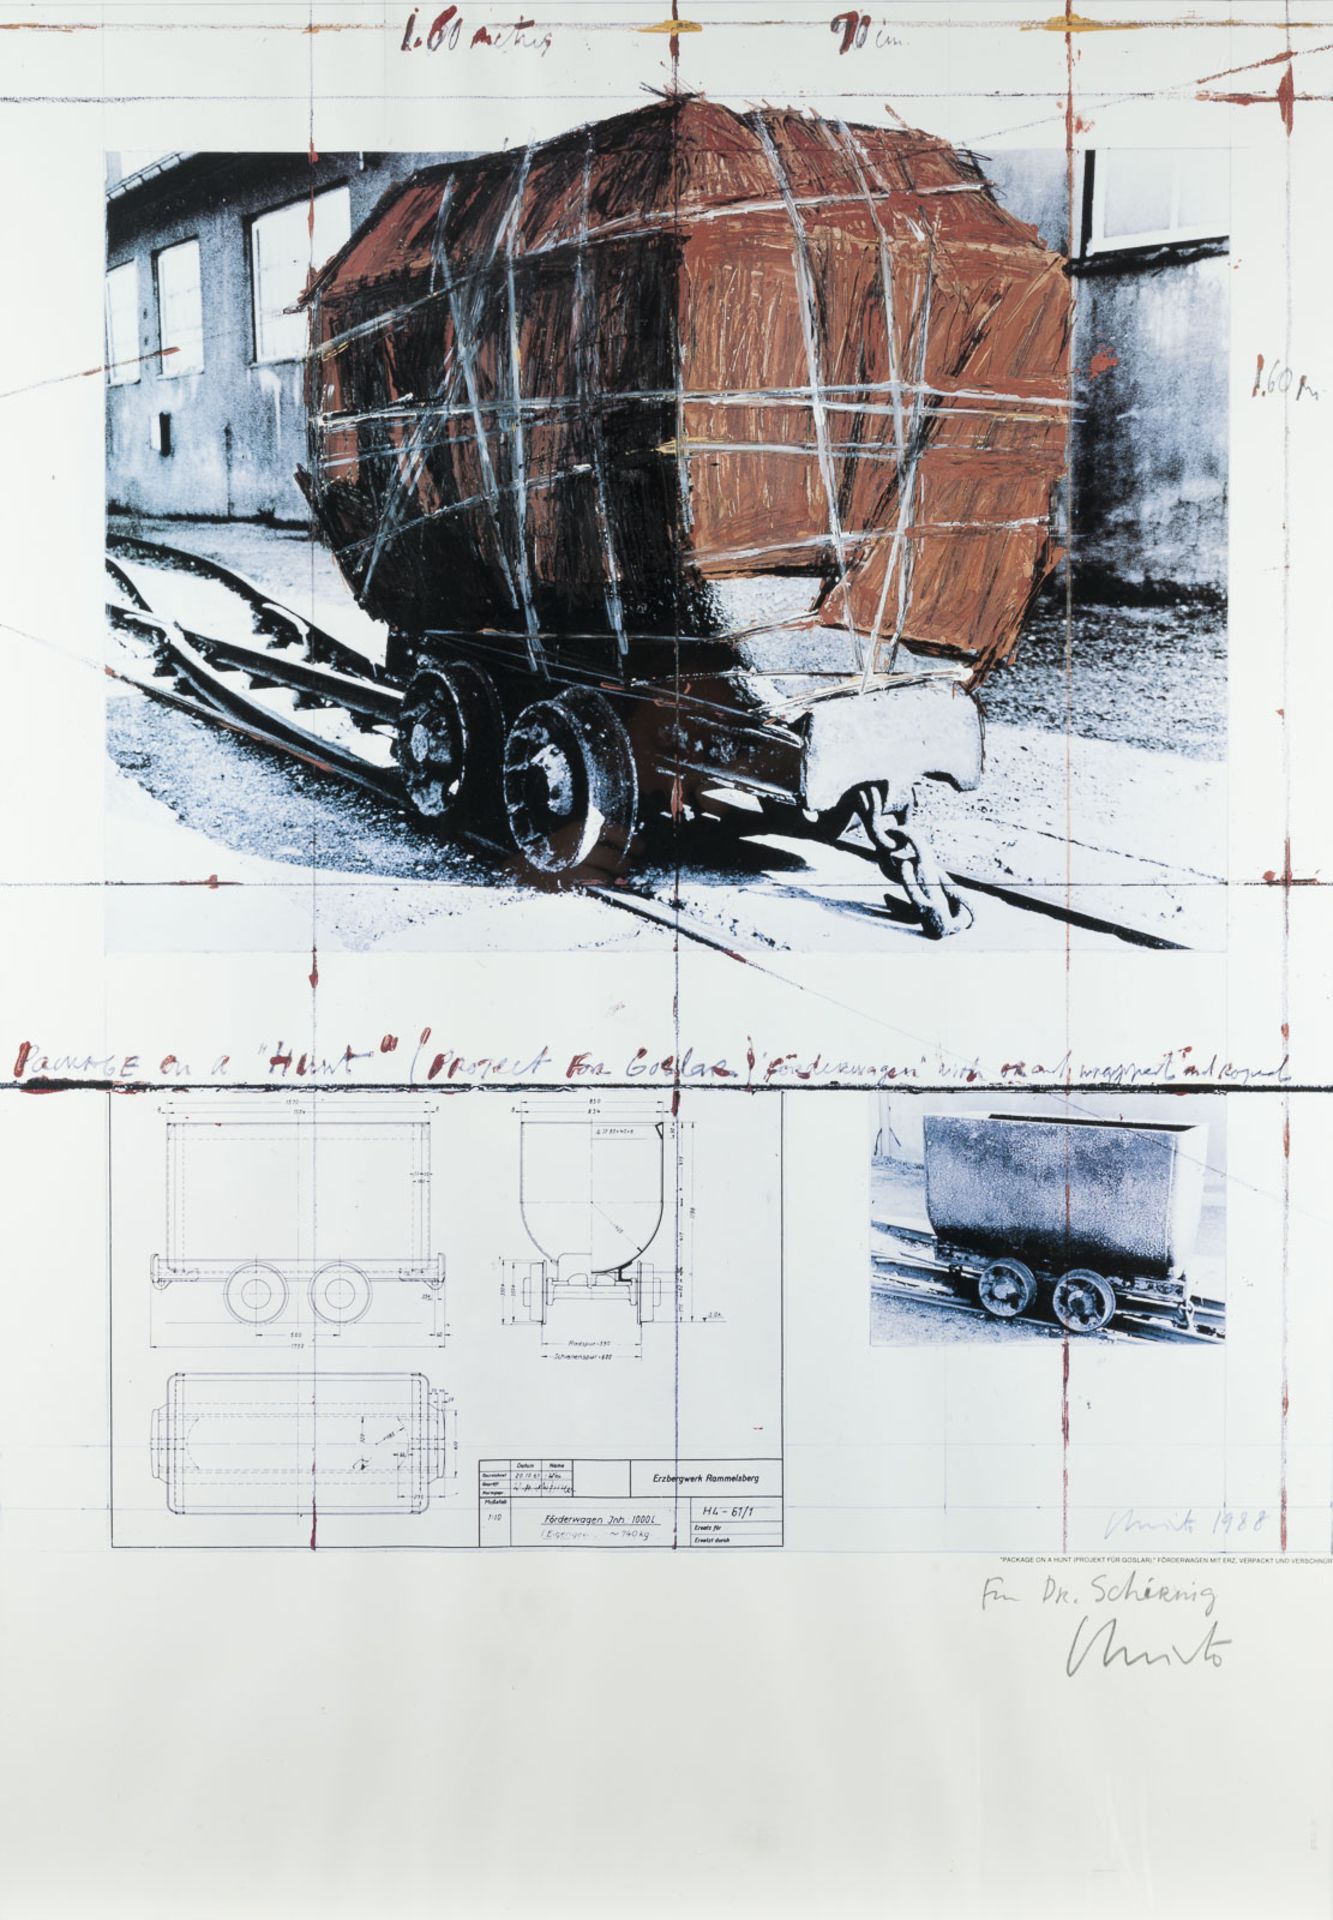 CHRISTO & JEANNE-CLAUDE 'PACKAGE ON A 'HUNT' - PROJECT FOR GOSLAR' (1988)